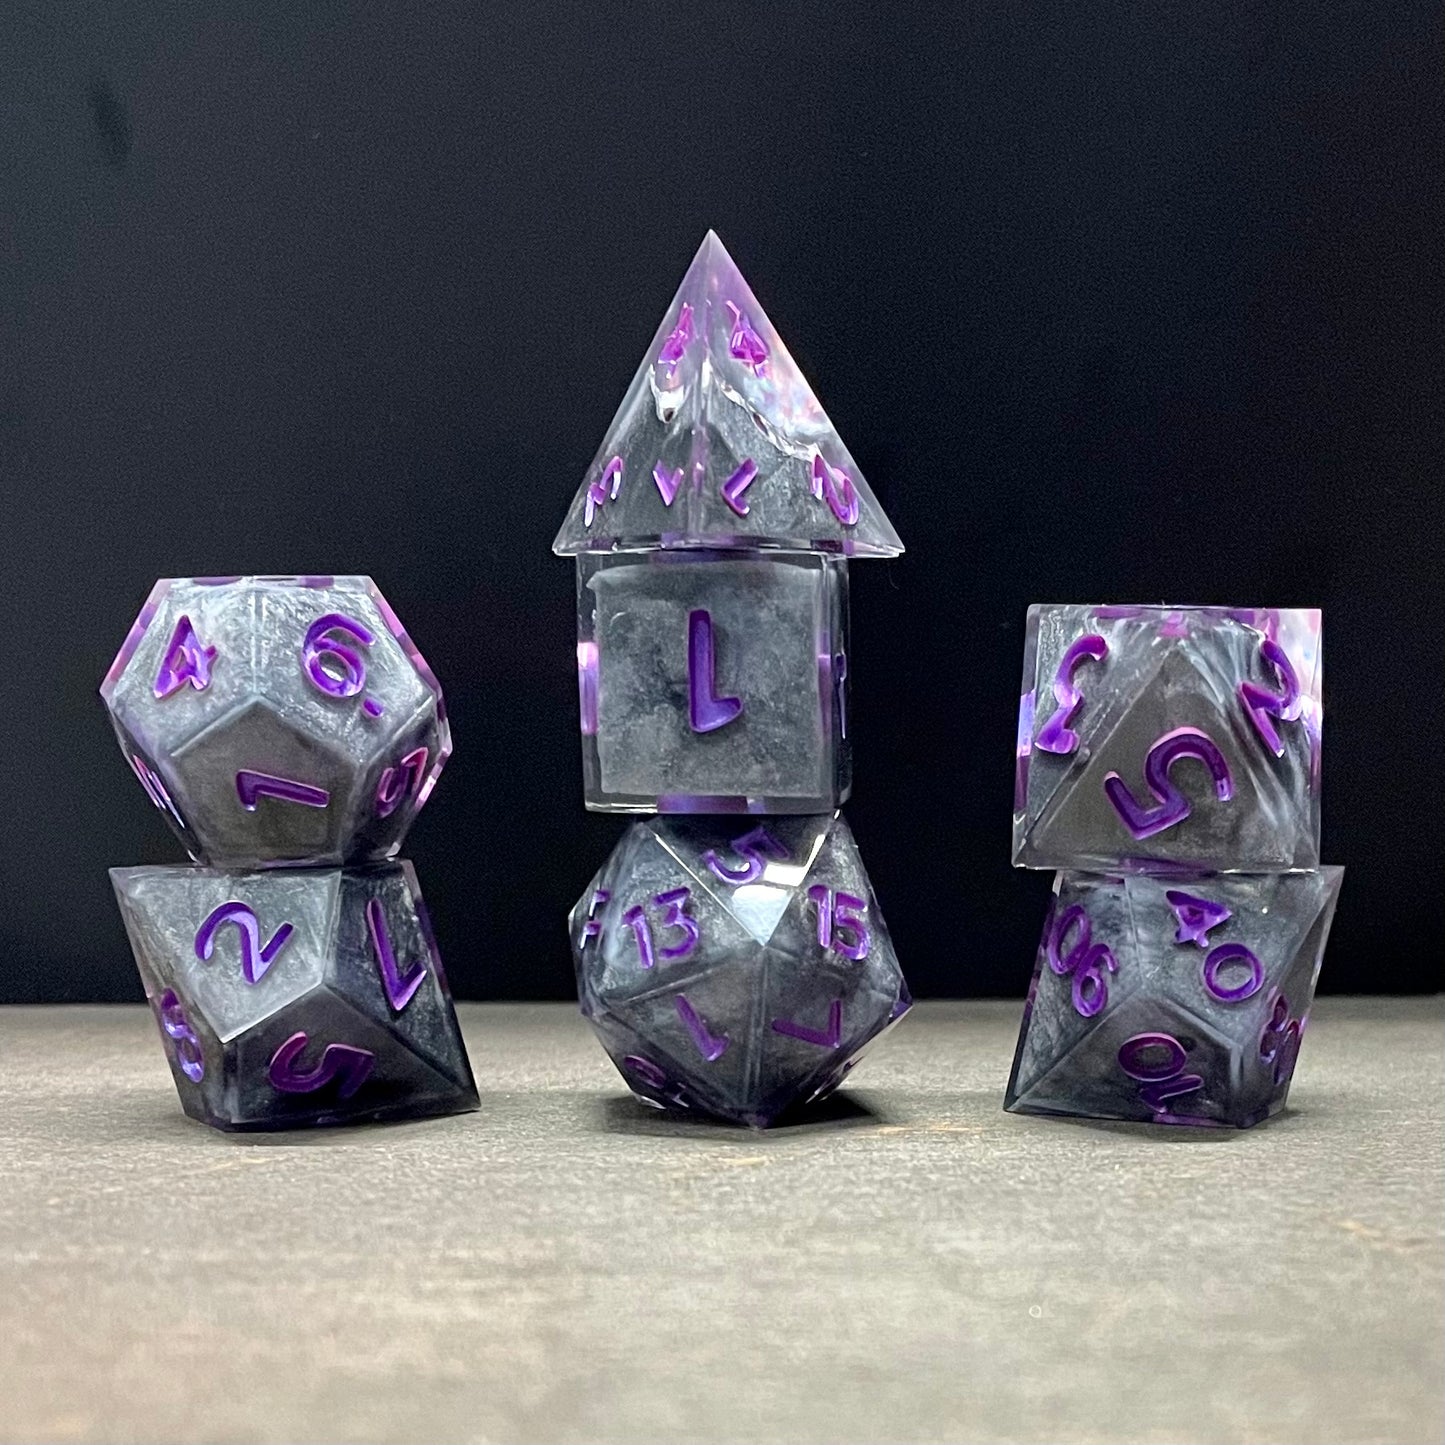 The Heart of the Earth Polyhedral Set